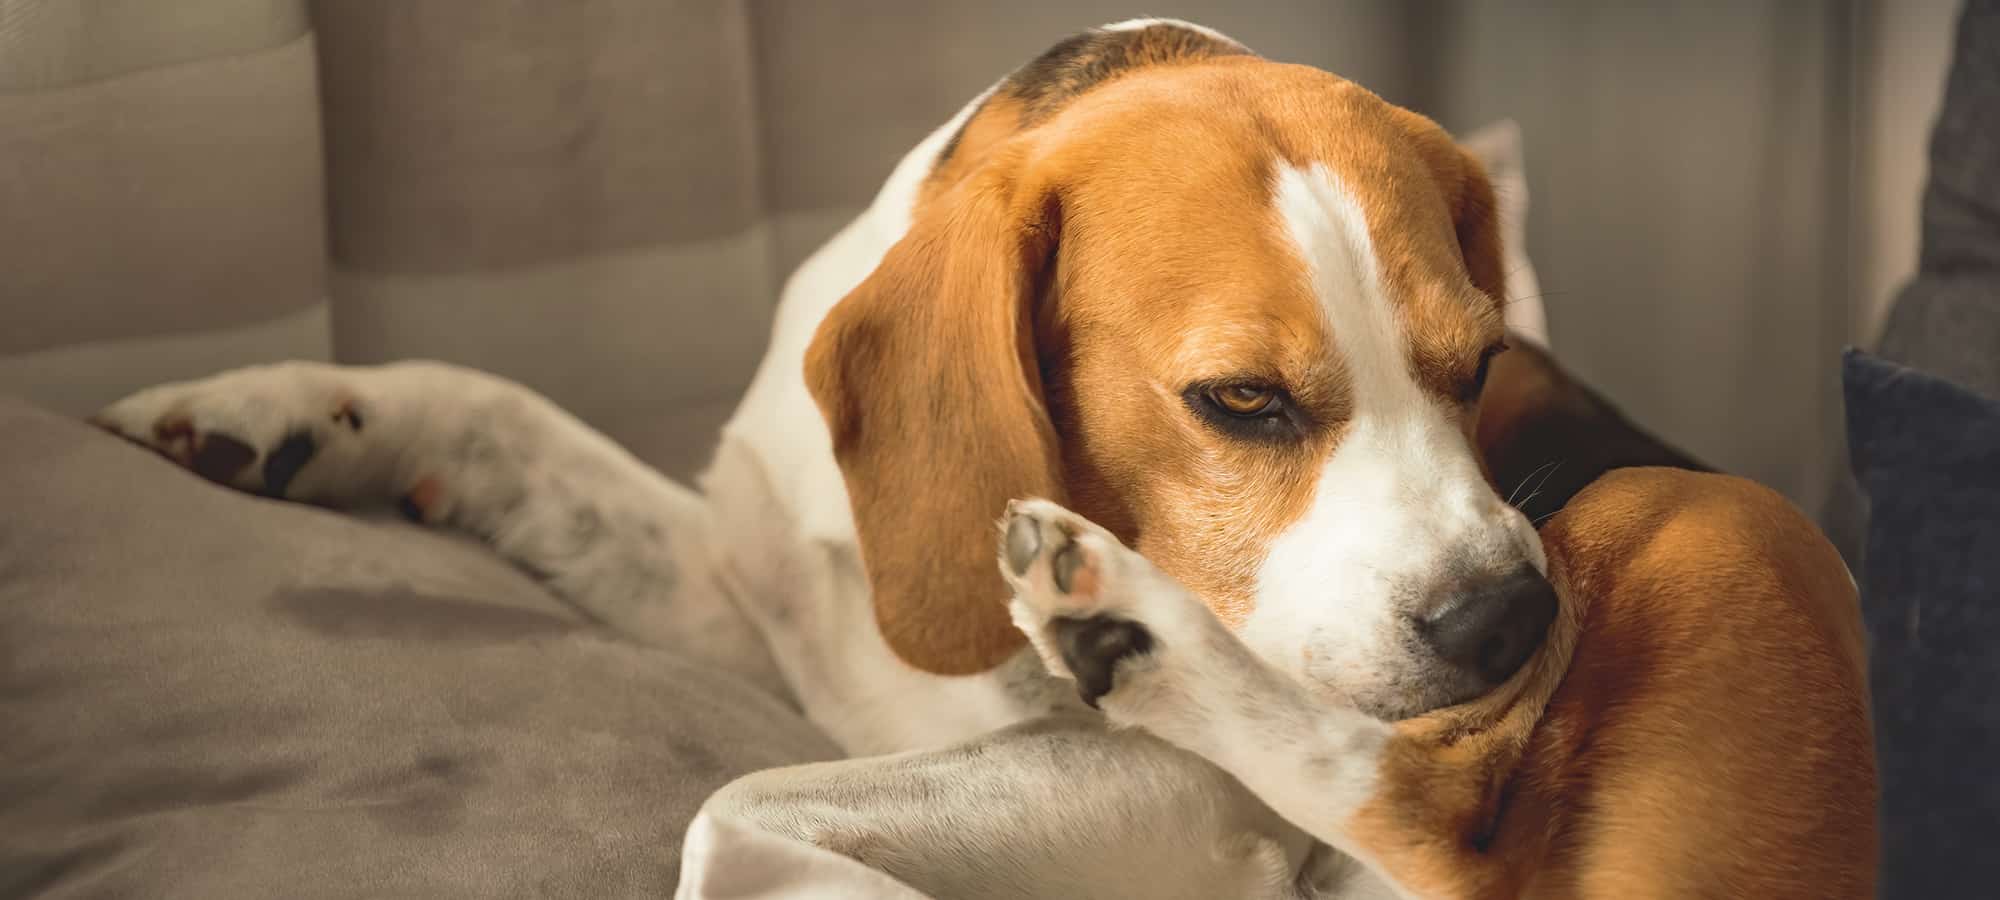 Treating Your Dog’s Itchy Skin